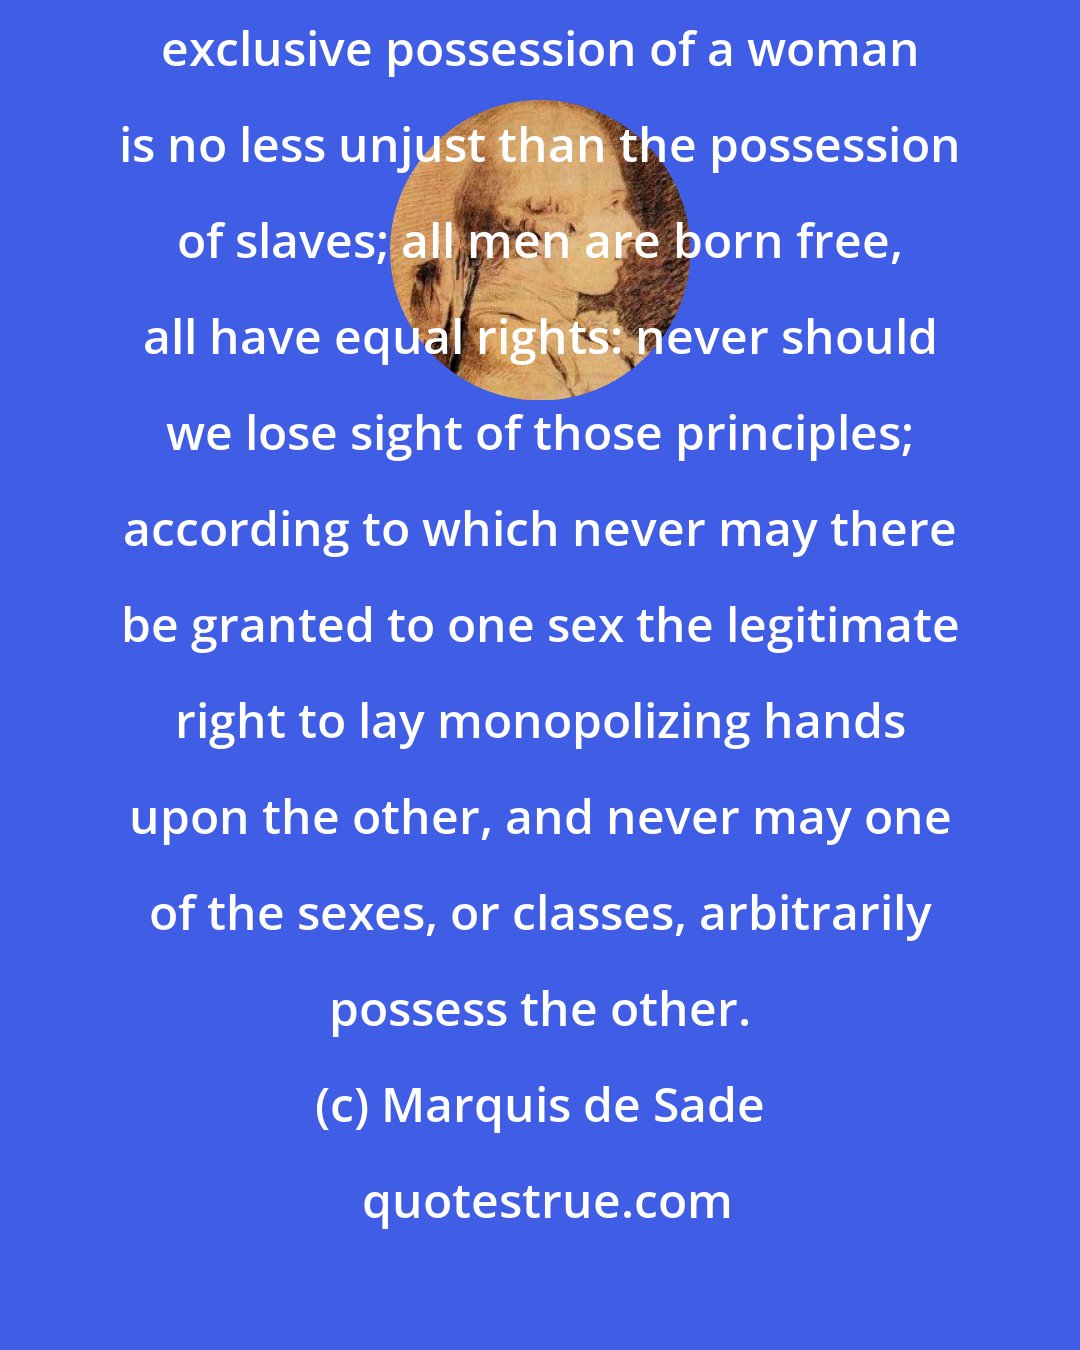 Marquis de Sade: Never may an act of possession be exercised upon a free being; the exclusive possession of a woman is no less unjust than the possession of slaves; all men are born free, all have equal rights: never should we lose sight of those principles; according to which never may there be granted to one sex the legitimate right to lay monopolizing hands upon the other, and never may one of the sexes, or classes, arbitrarily possess the other.